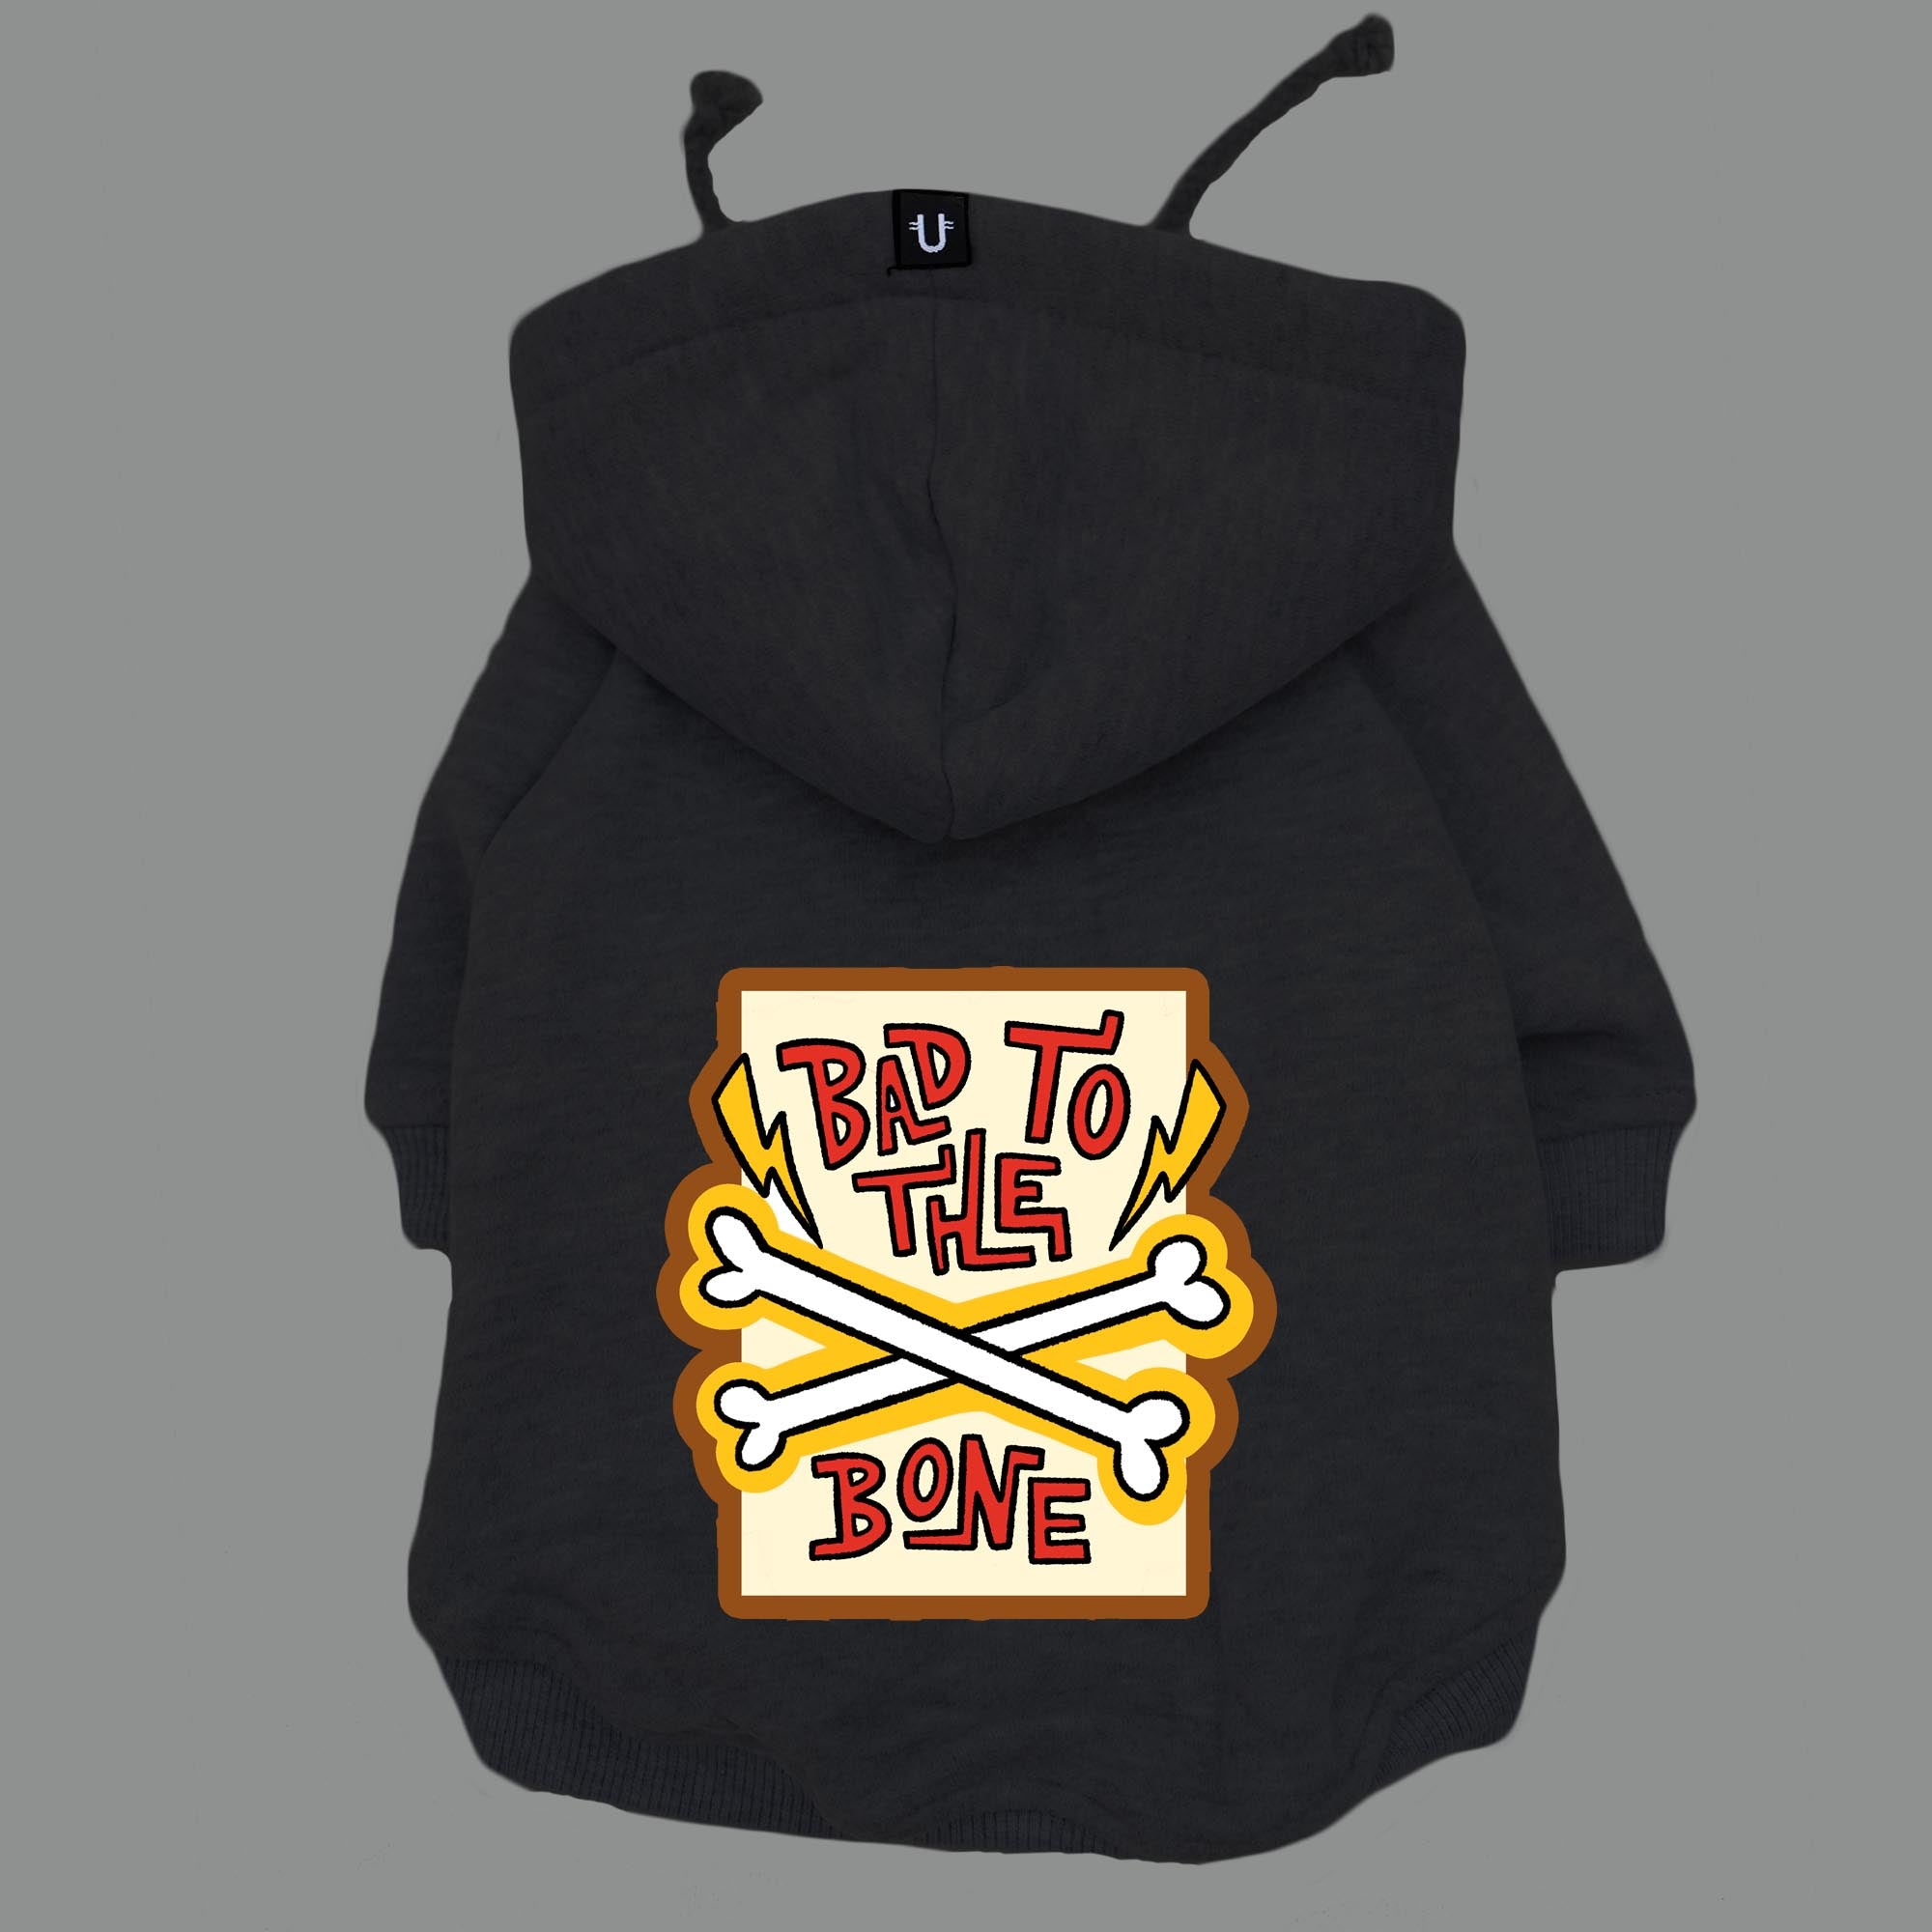 Bad to the bone dog hoodie by Ginger Taylor and Pethaus